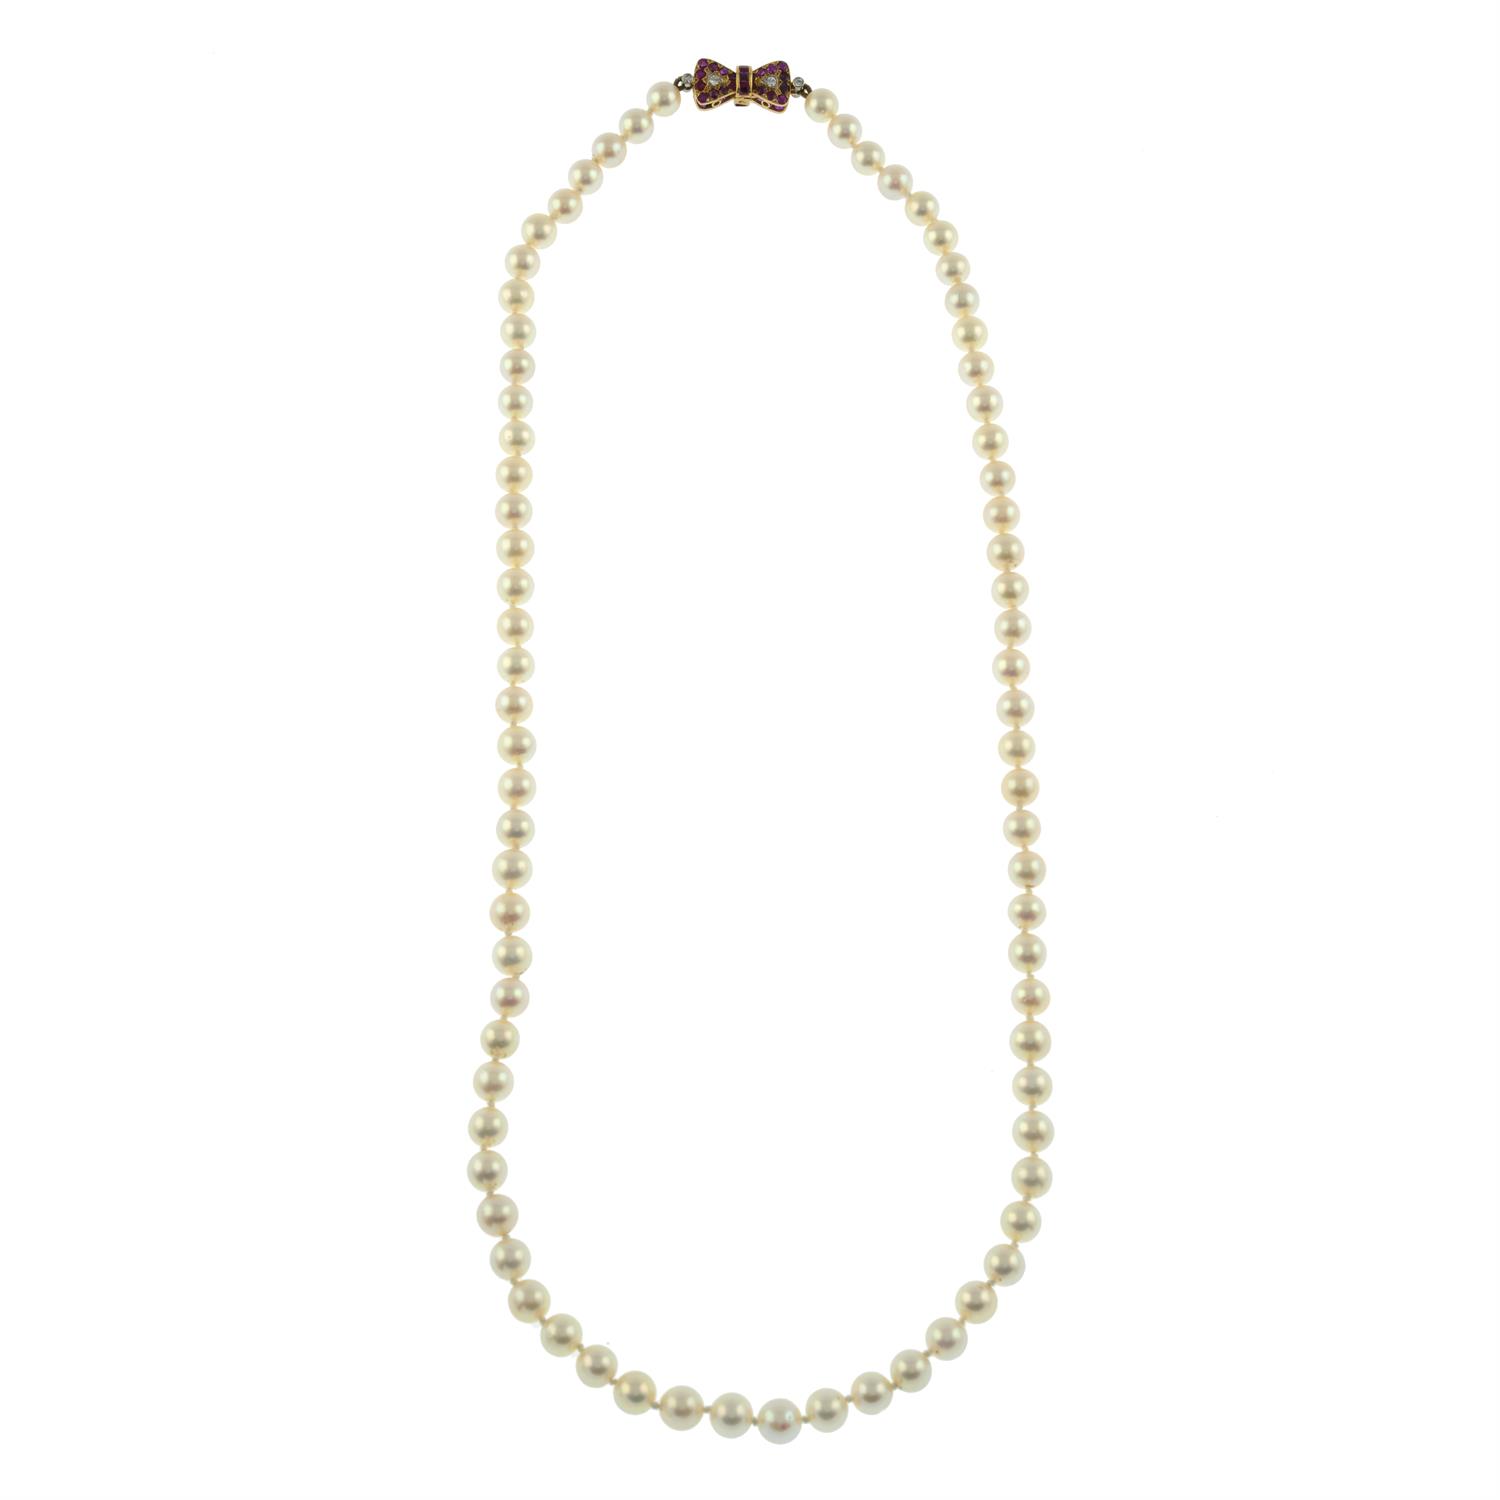 Cultured pearl necklace, with ruby & diamond clasp - Image 2 of 4